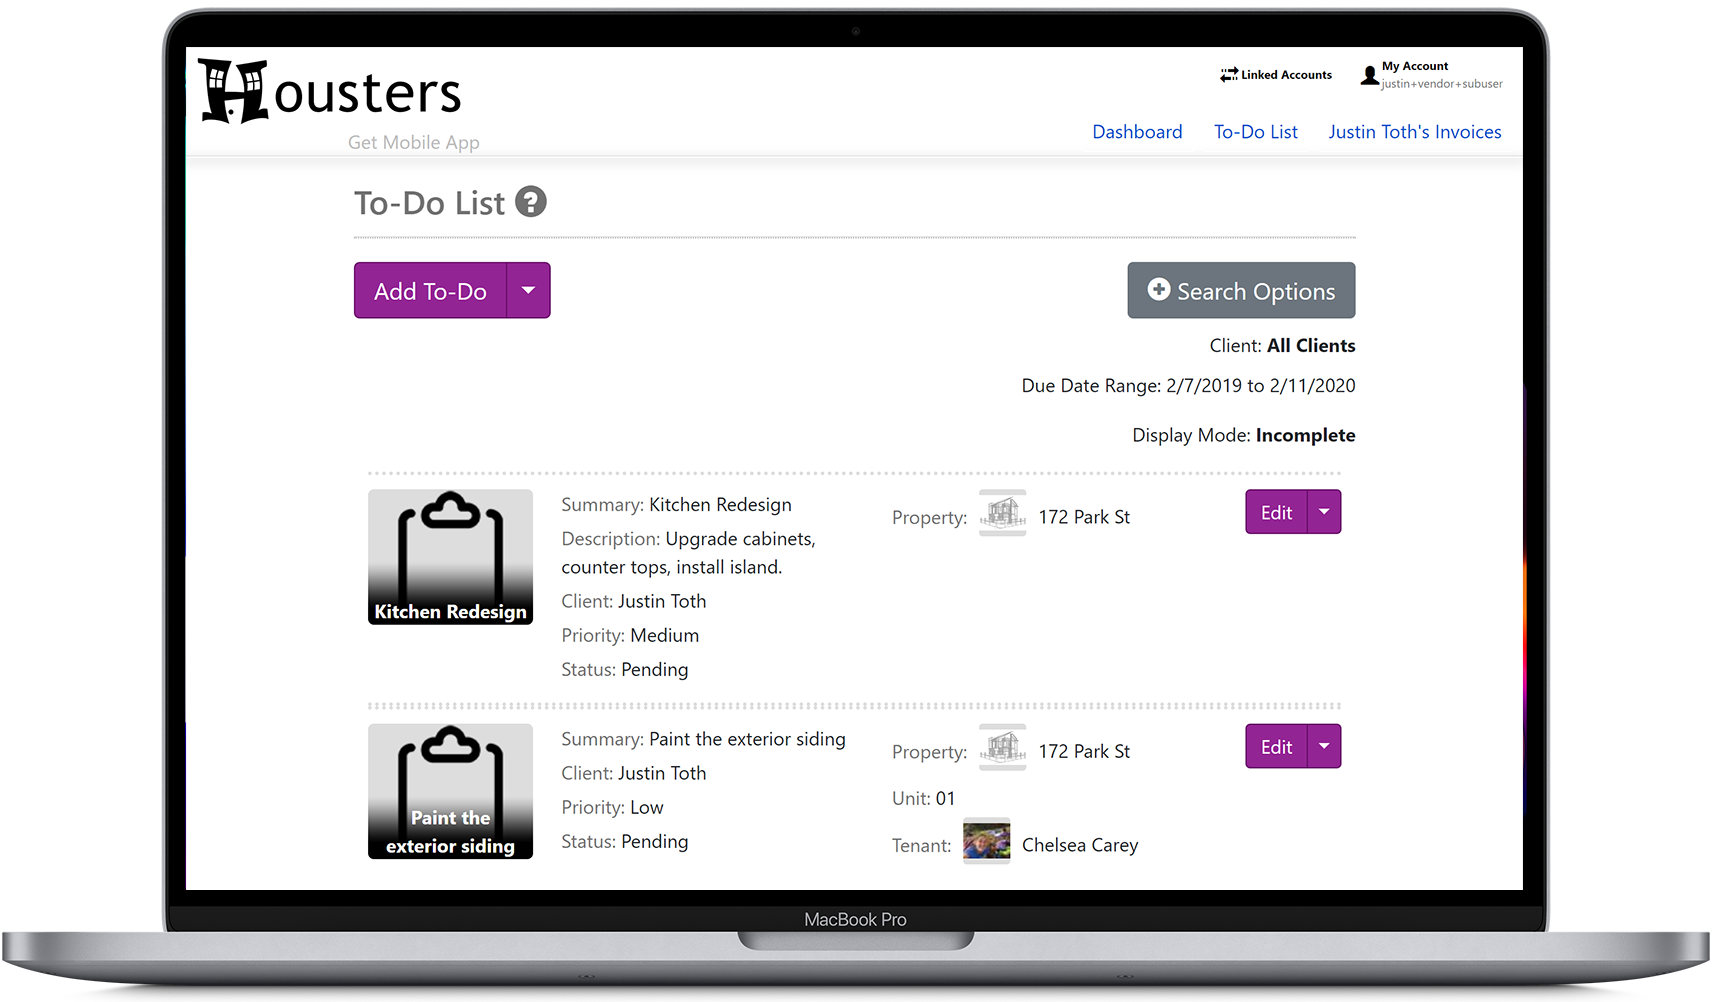 Contractors can view to-do list tasks shared with them by their landlord and property manager clients